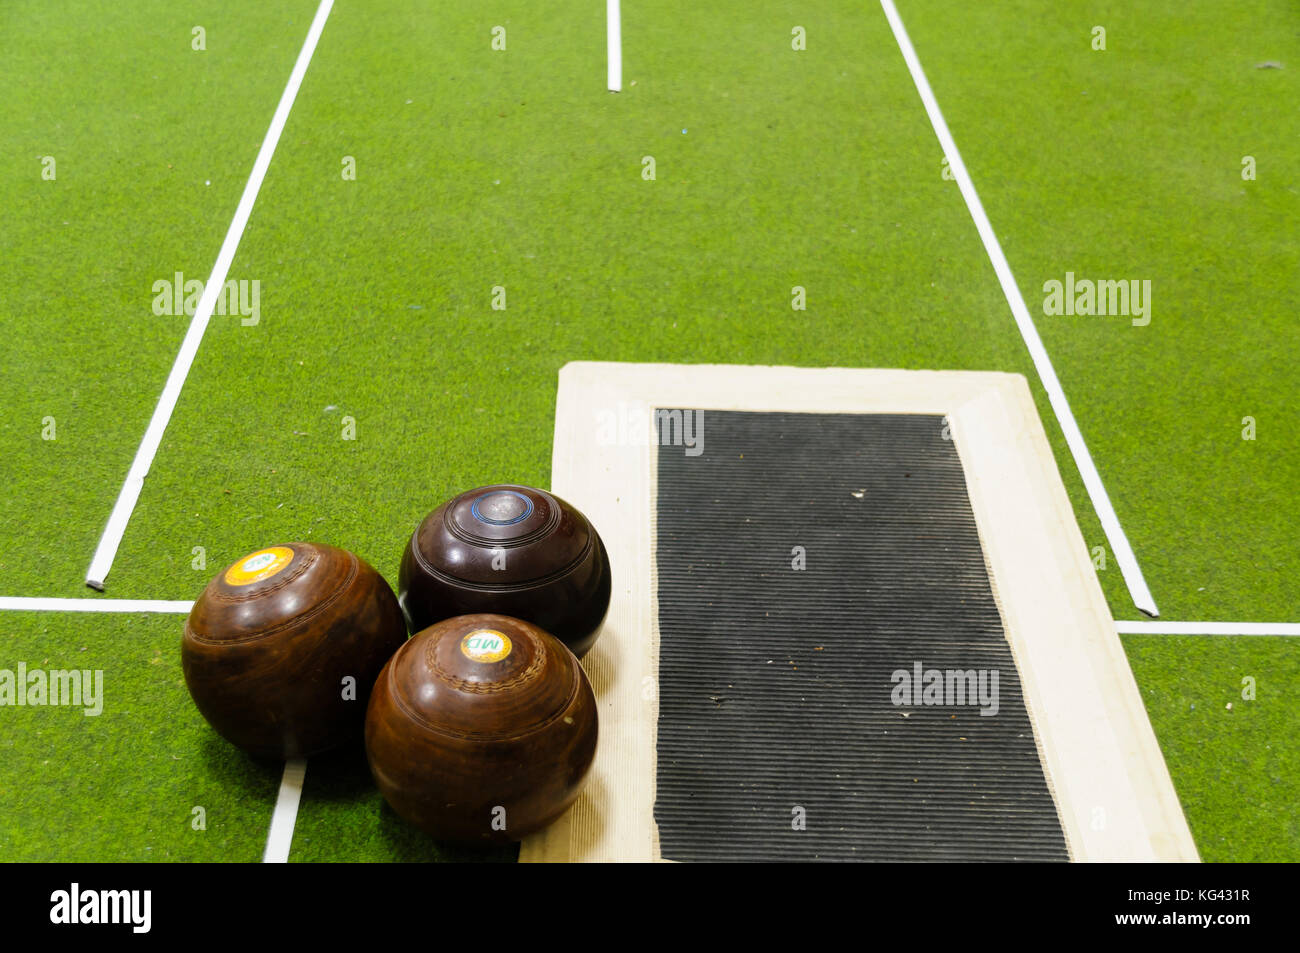 Bowls on an indoor bowls carpet Stock Photo